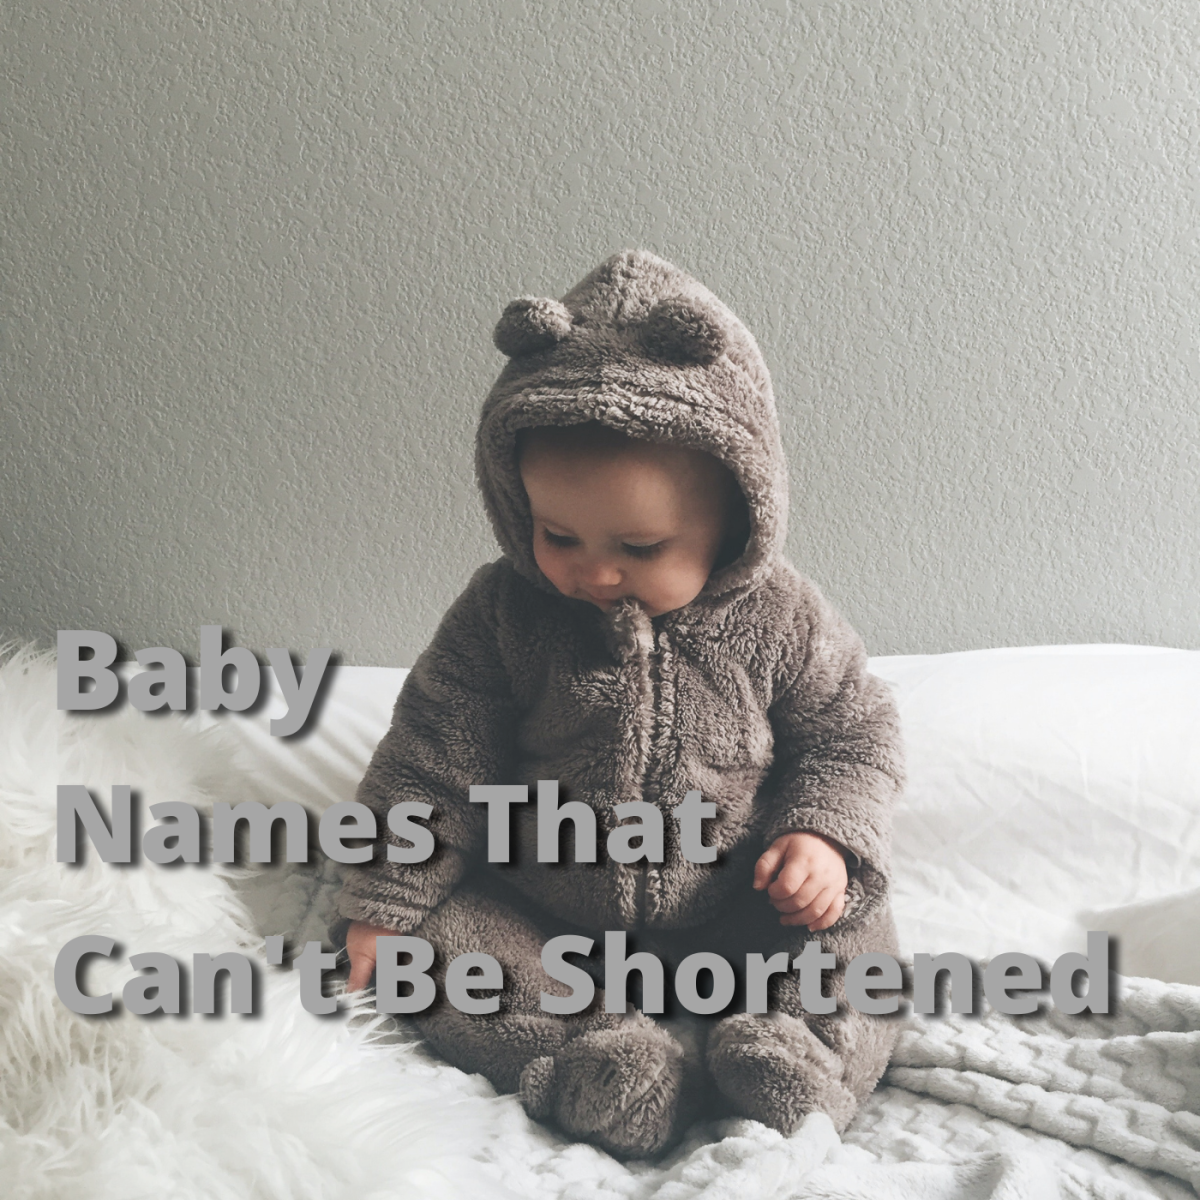 Consider choosing from this list if you're looking for a name that can't be shortened.